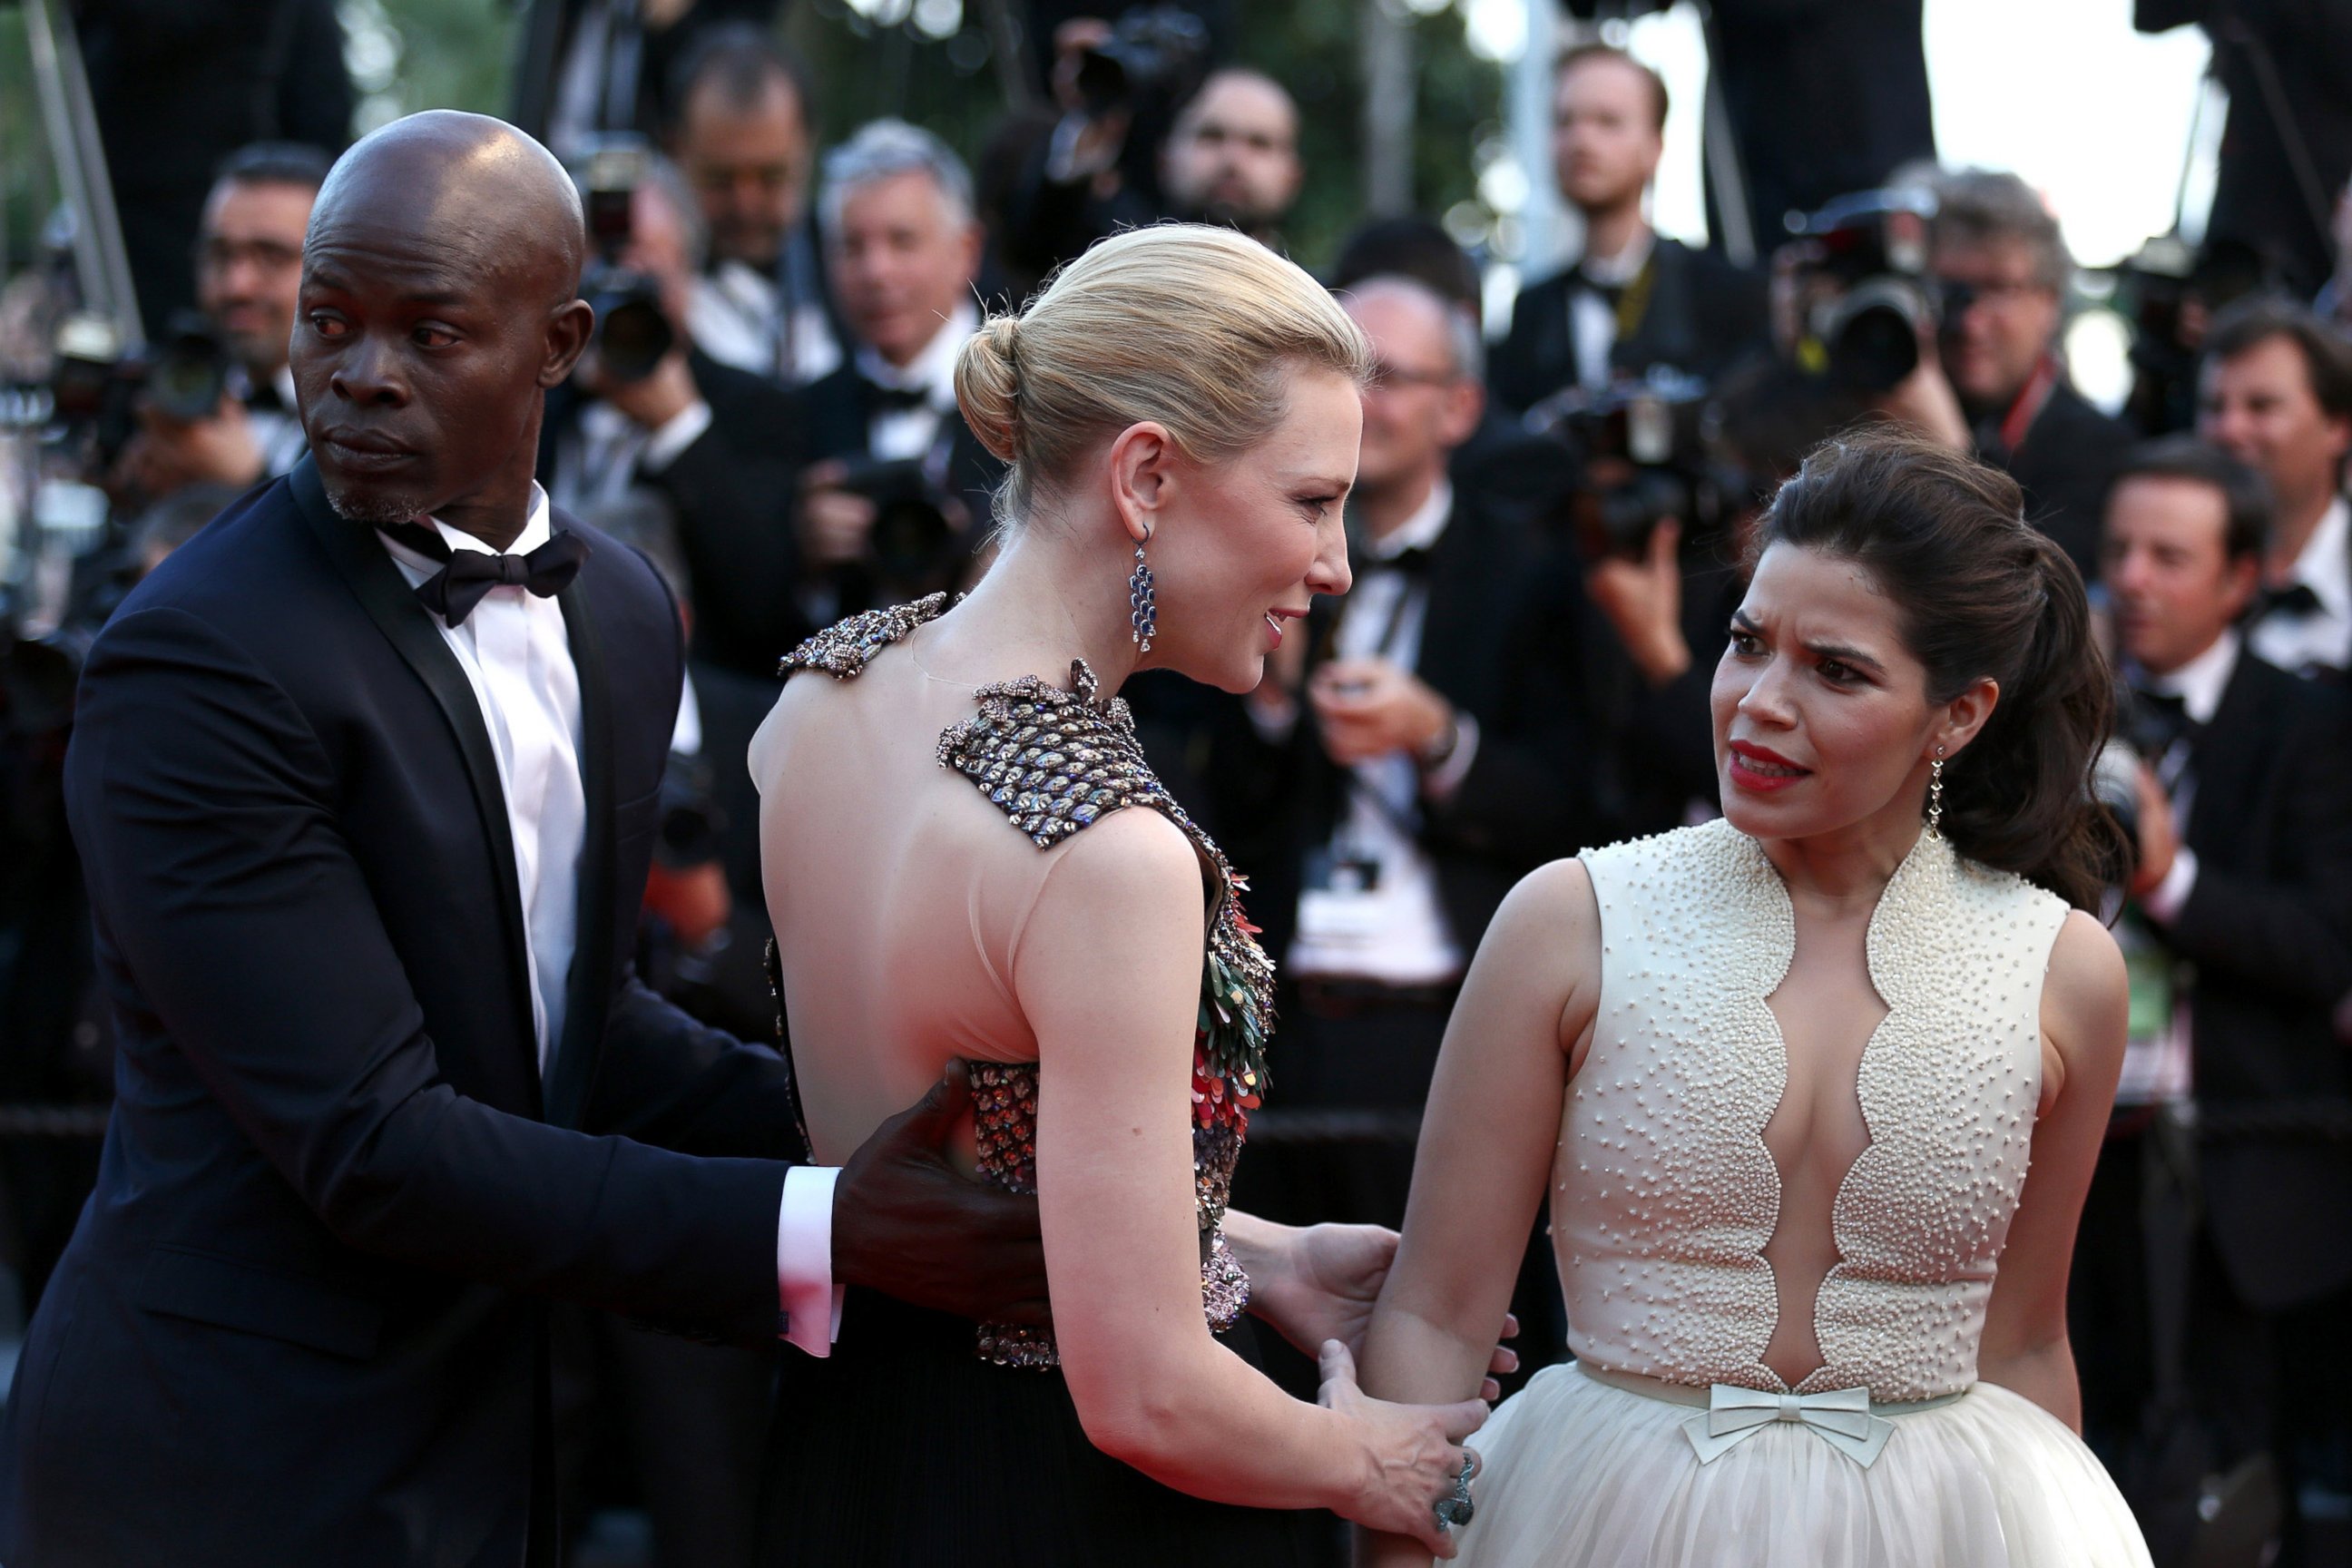 PHOTO: America Ferrera reacts after a man attempted to climb under her dress on the red carpet at the "How To Train Your Dragon 2" premiere during the Cannes Film Festival on May 16, 2014 in Cannes, France.